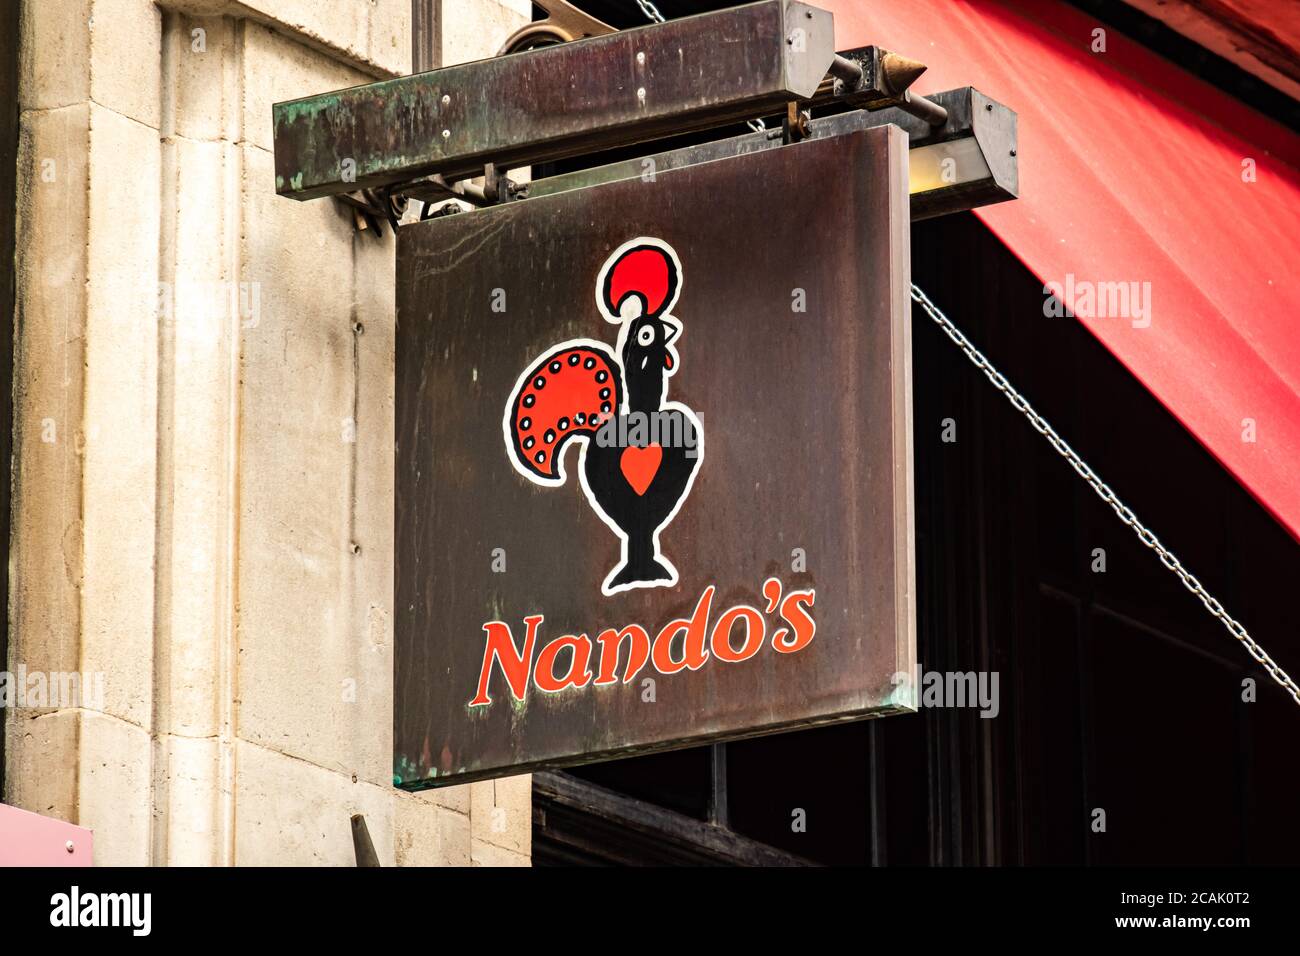 London- Nando's restaurant signage in London's West End Stock Photo